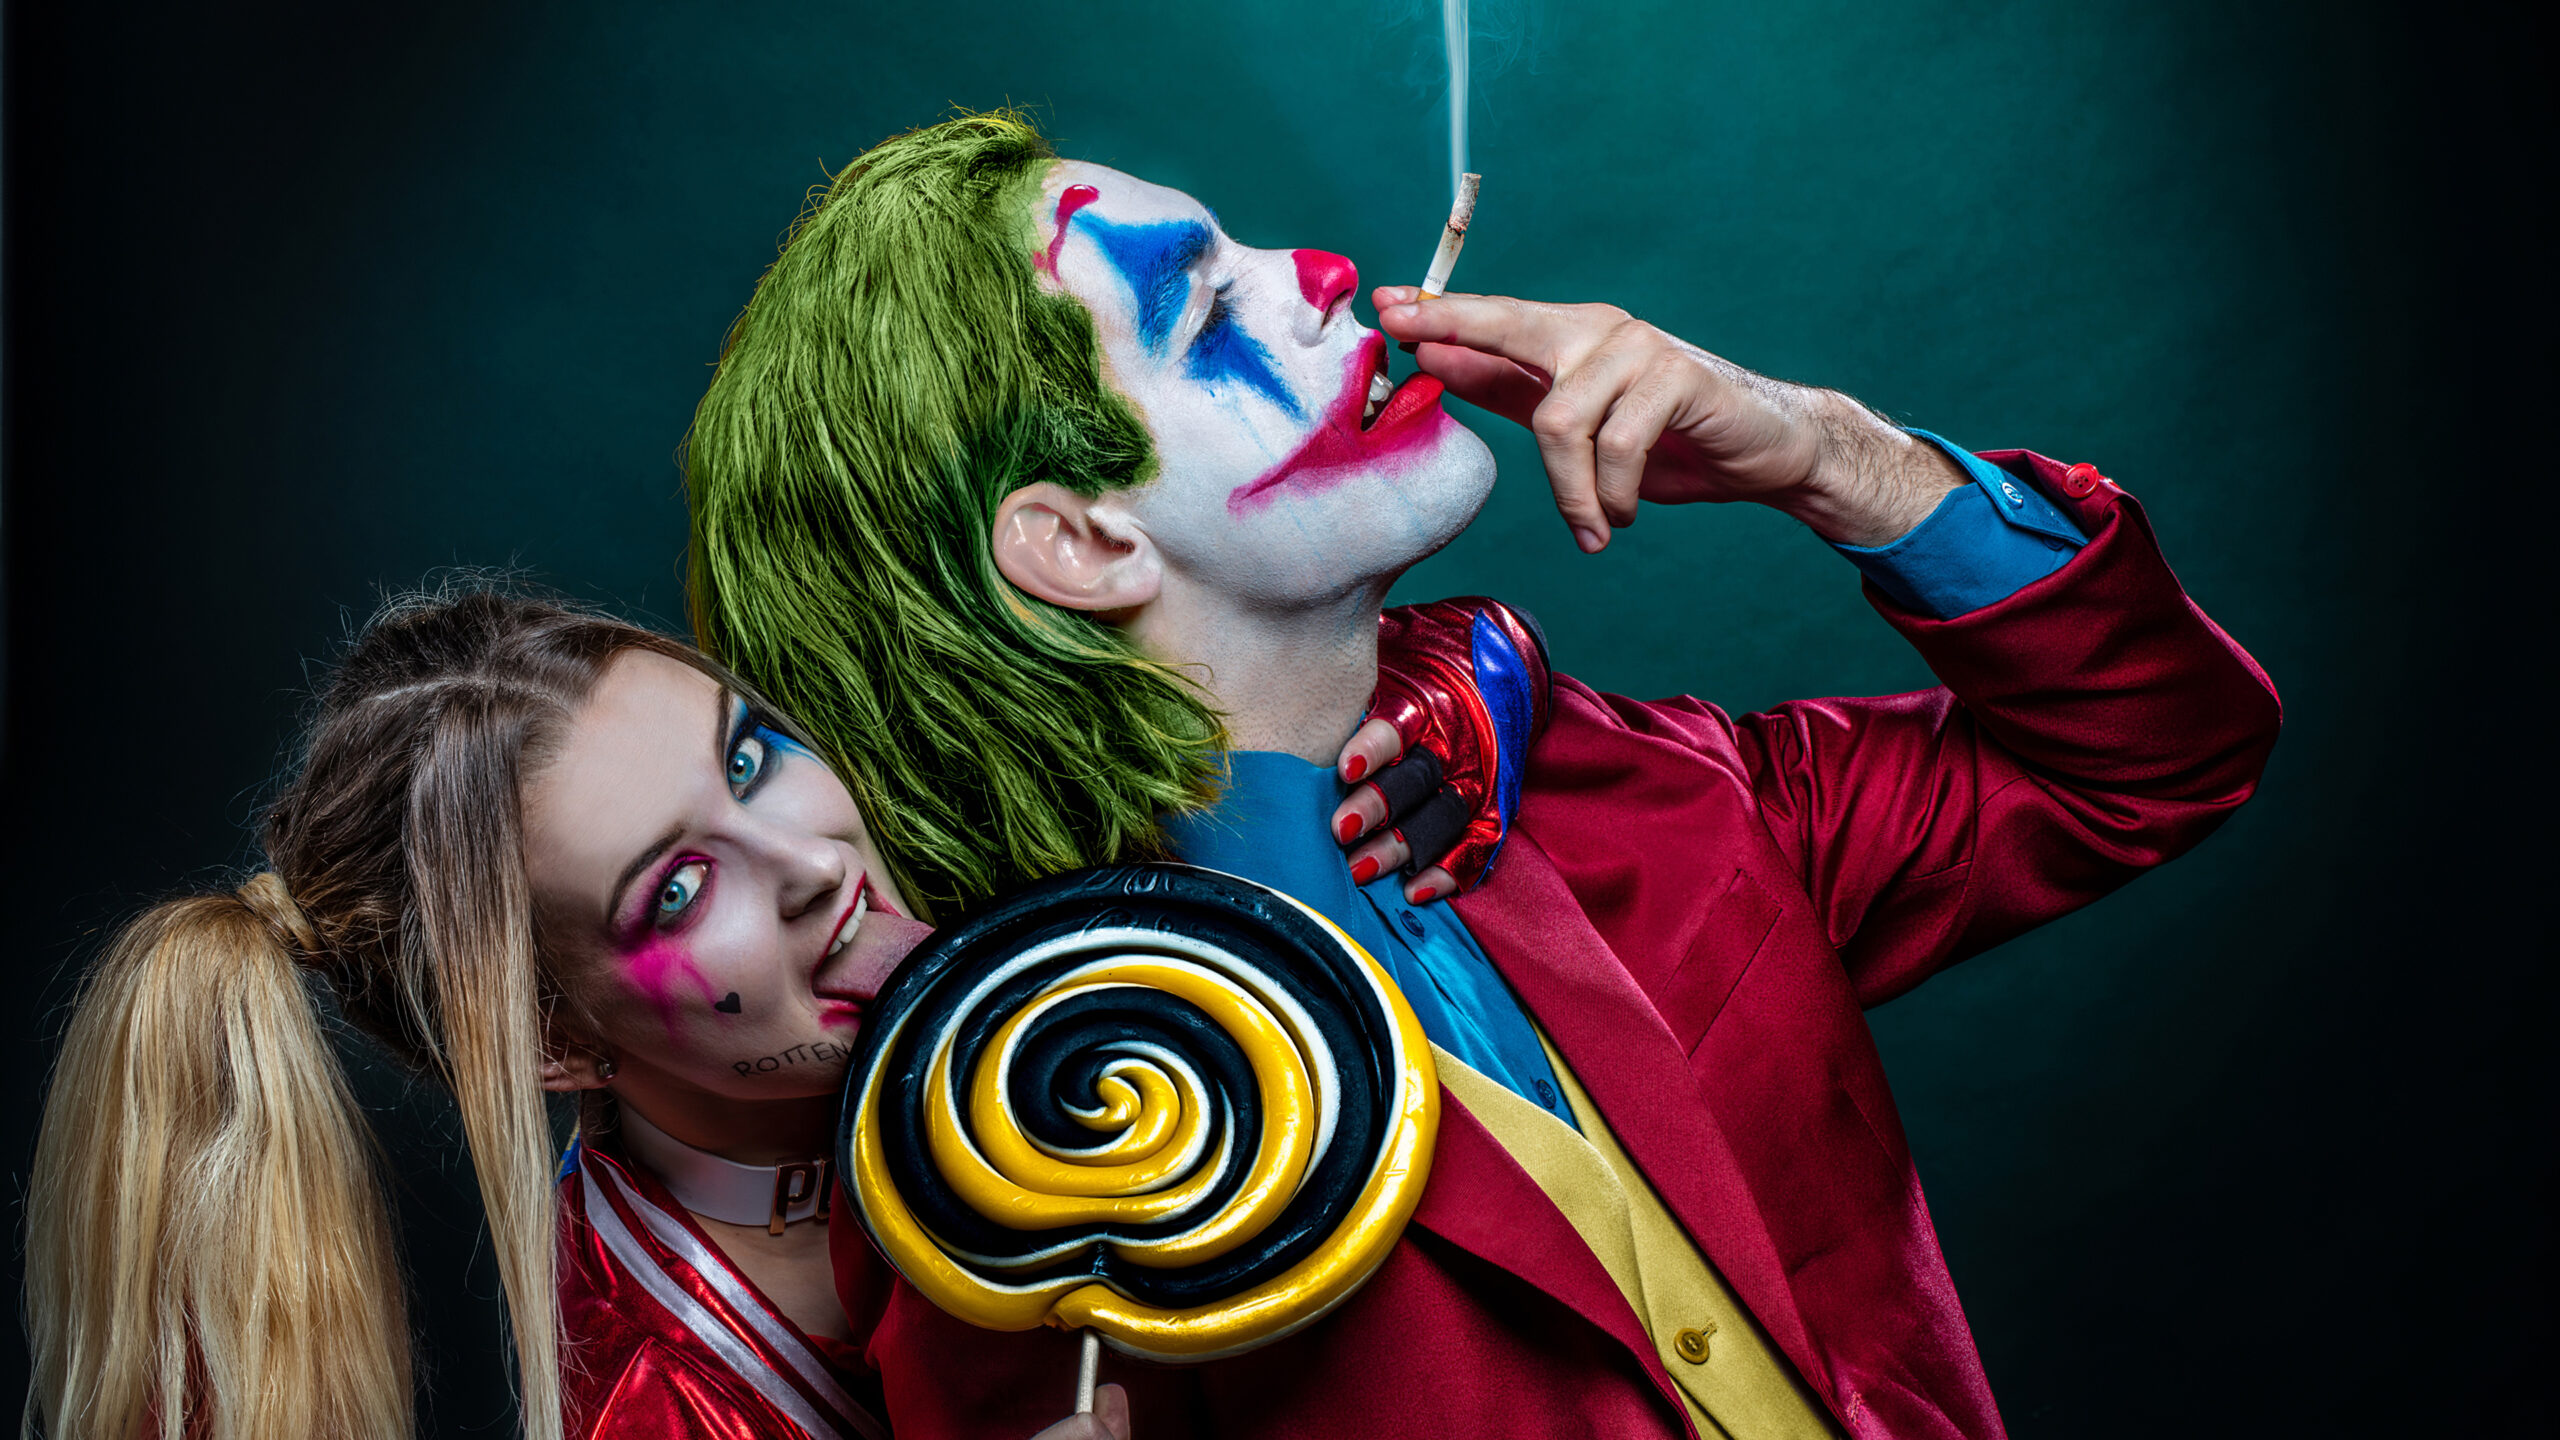 Girl Is Standing Near A Man With Joker Costume And Having A Big Lollipop With Harley Quinn Halloween Costume K HD Halloween Costume